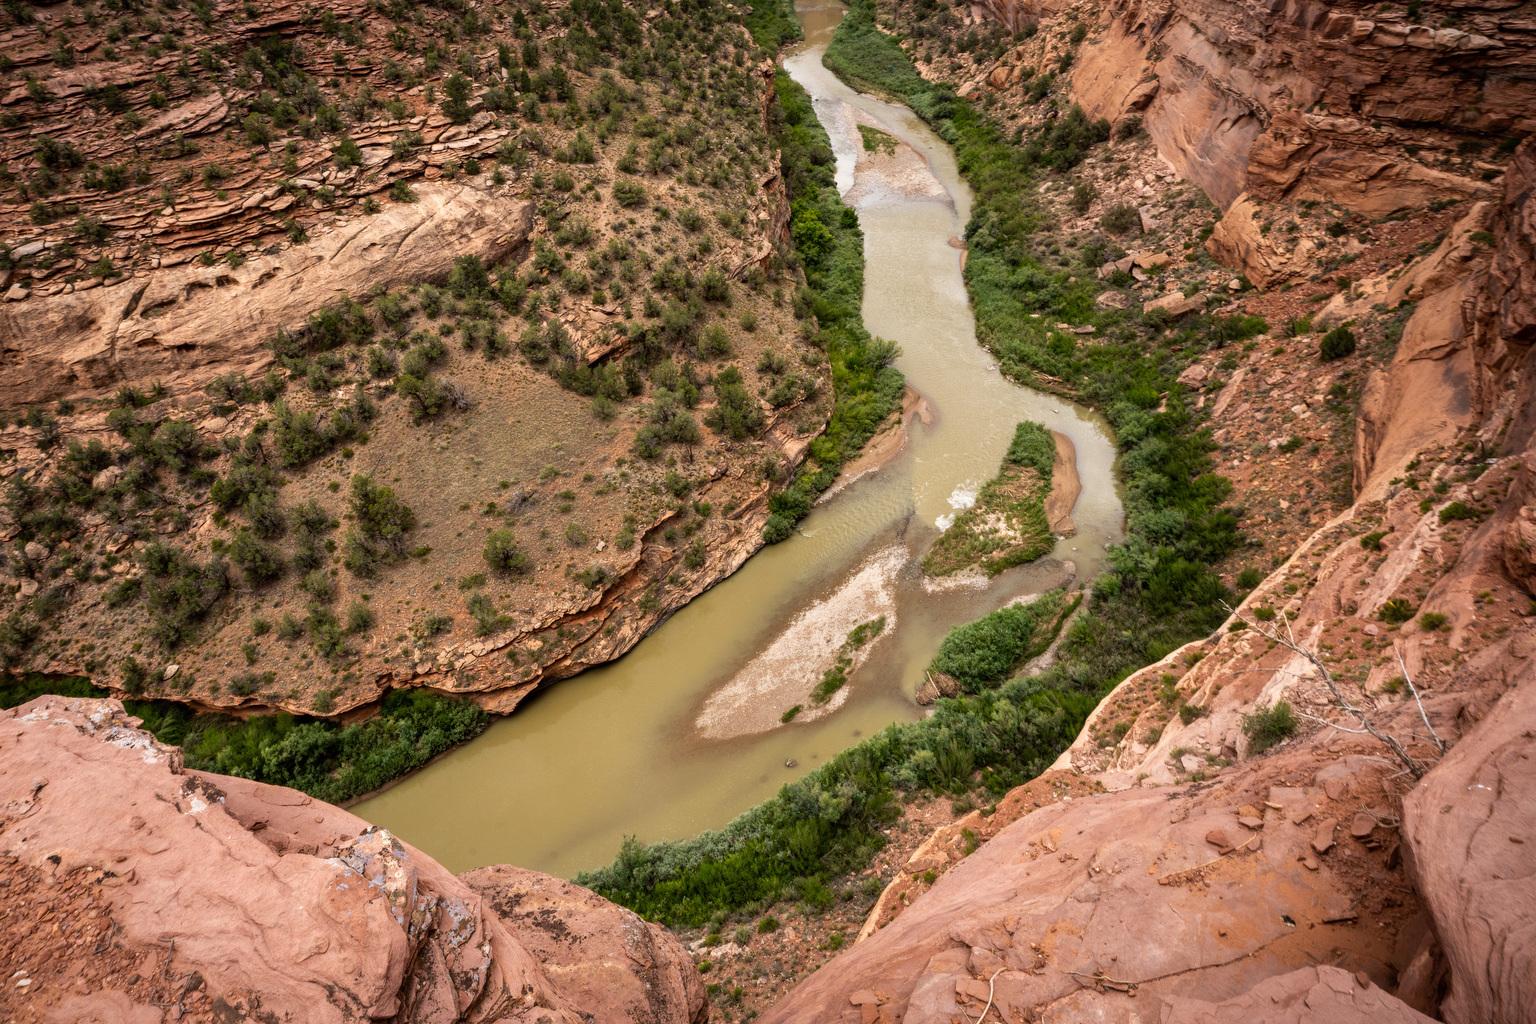 Part of the Dolores River Canyon